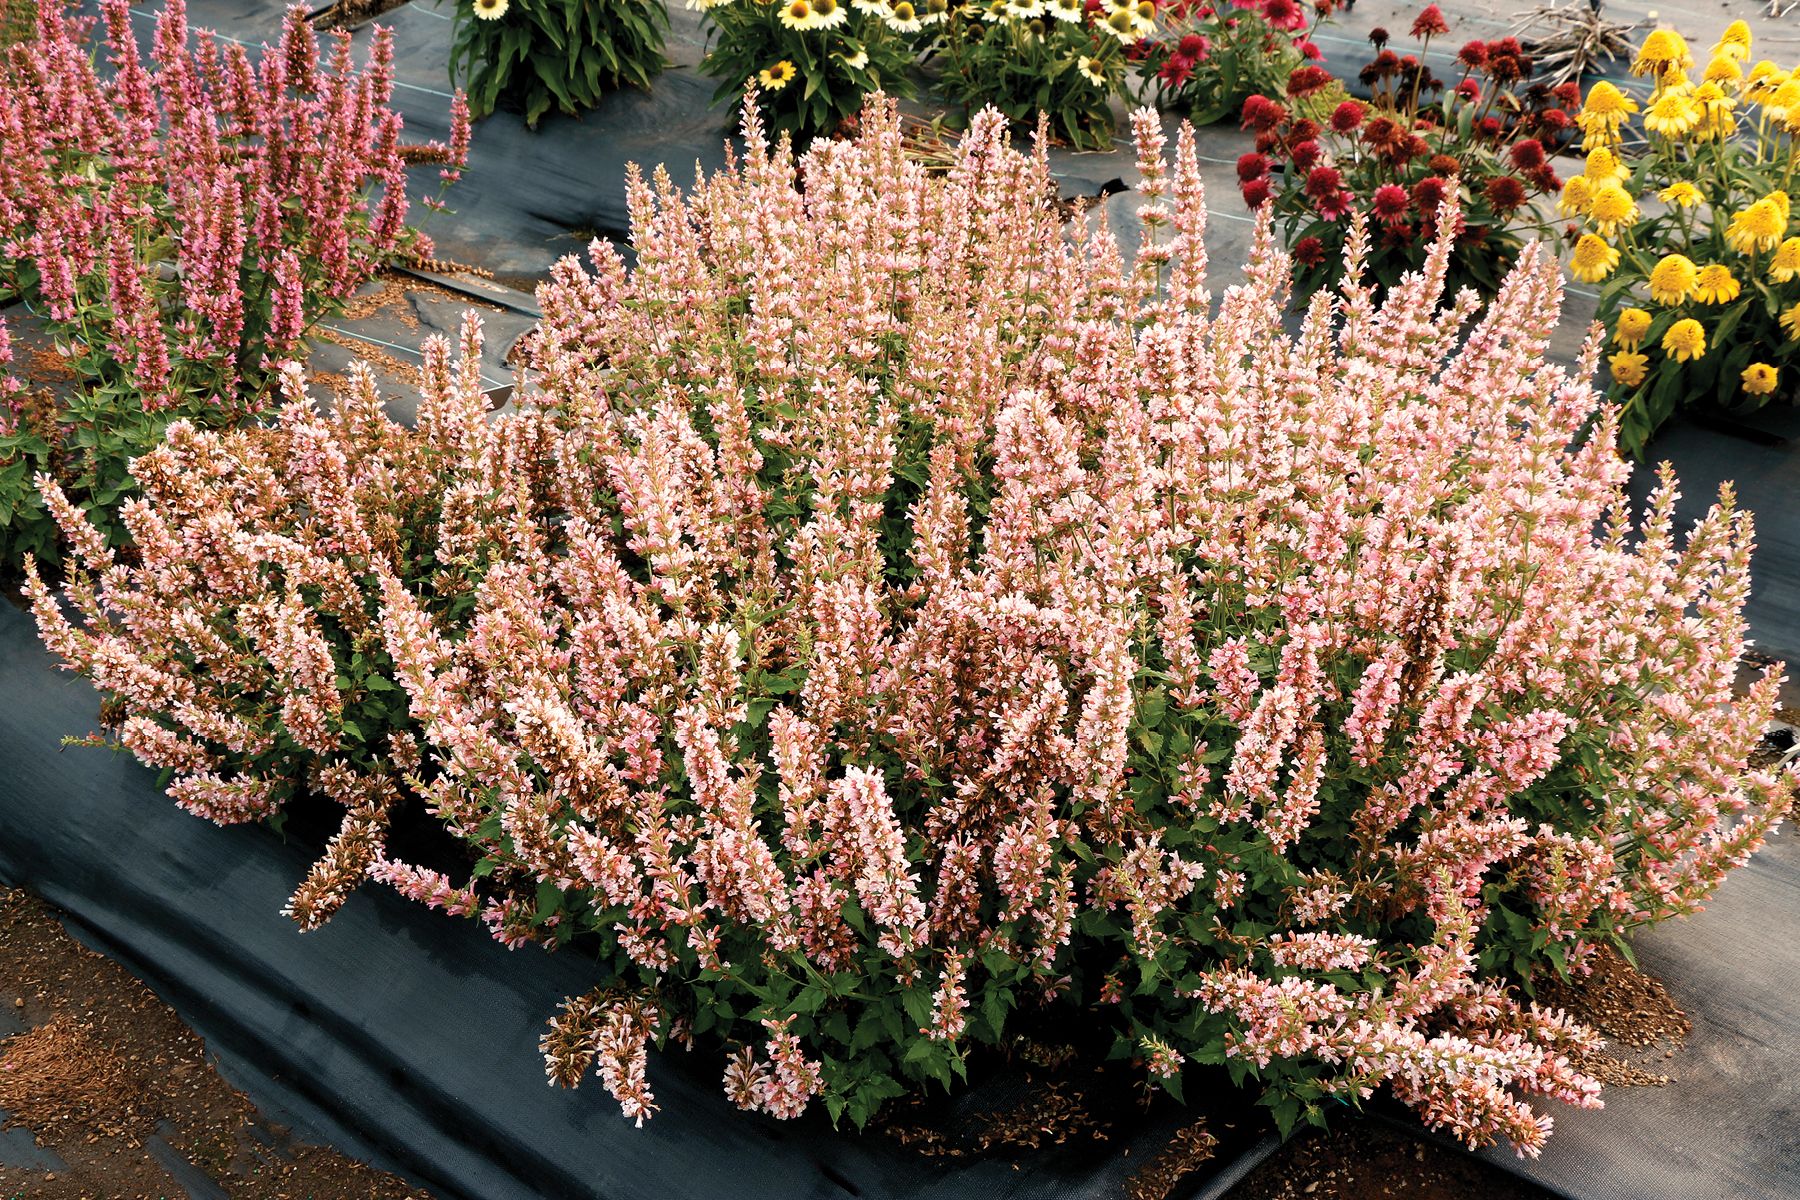 Agastache Pink Pearl